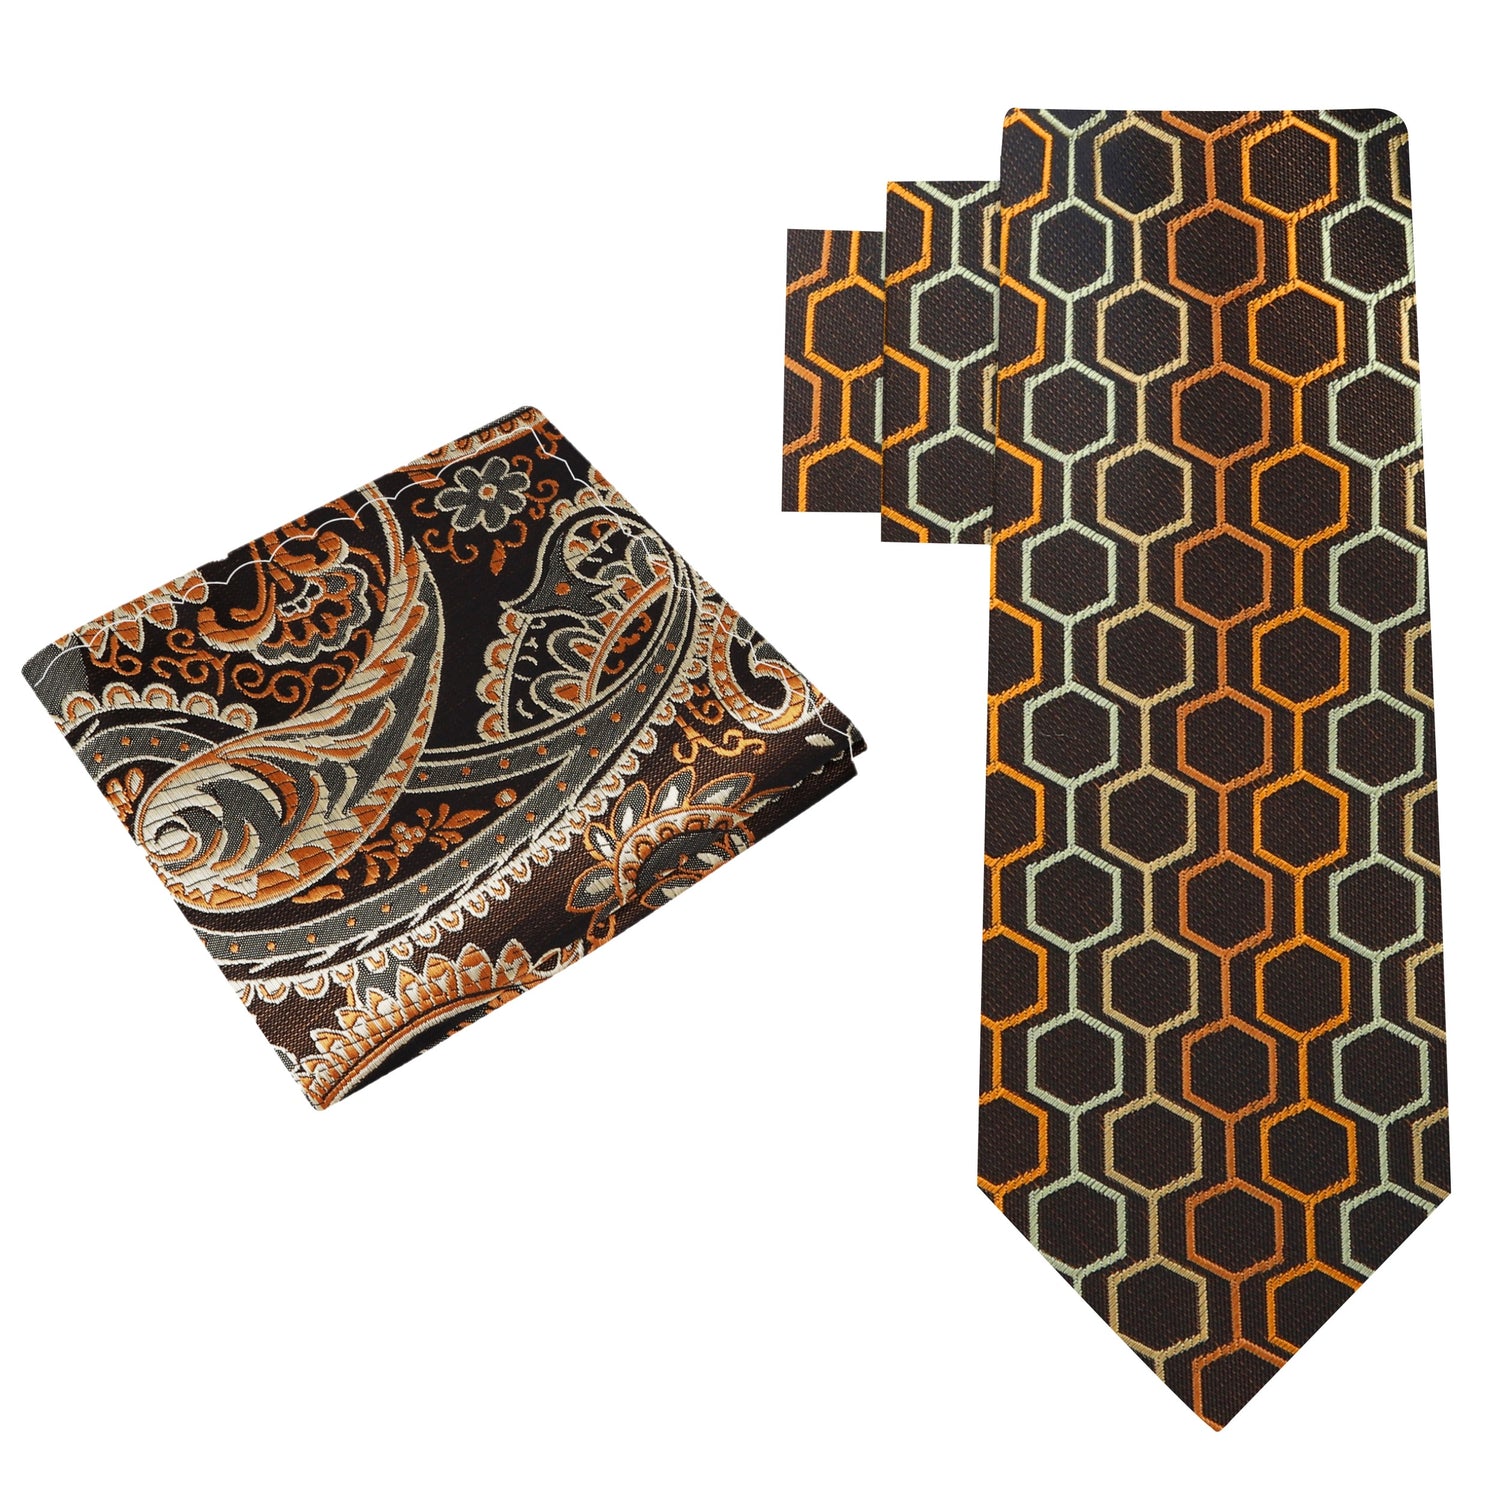 Alt View: Shades of Brown Geometric Necktie and Brown Paisley Square